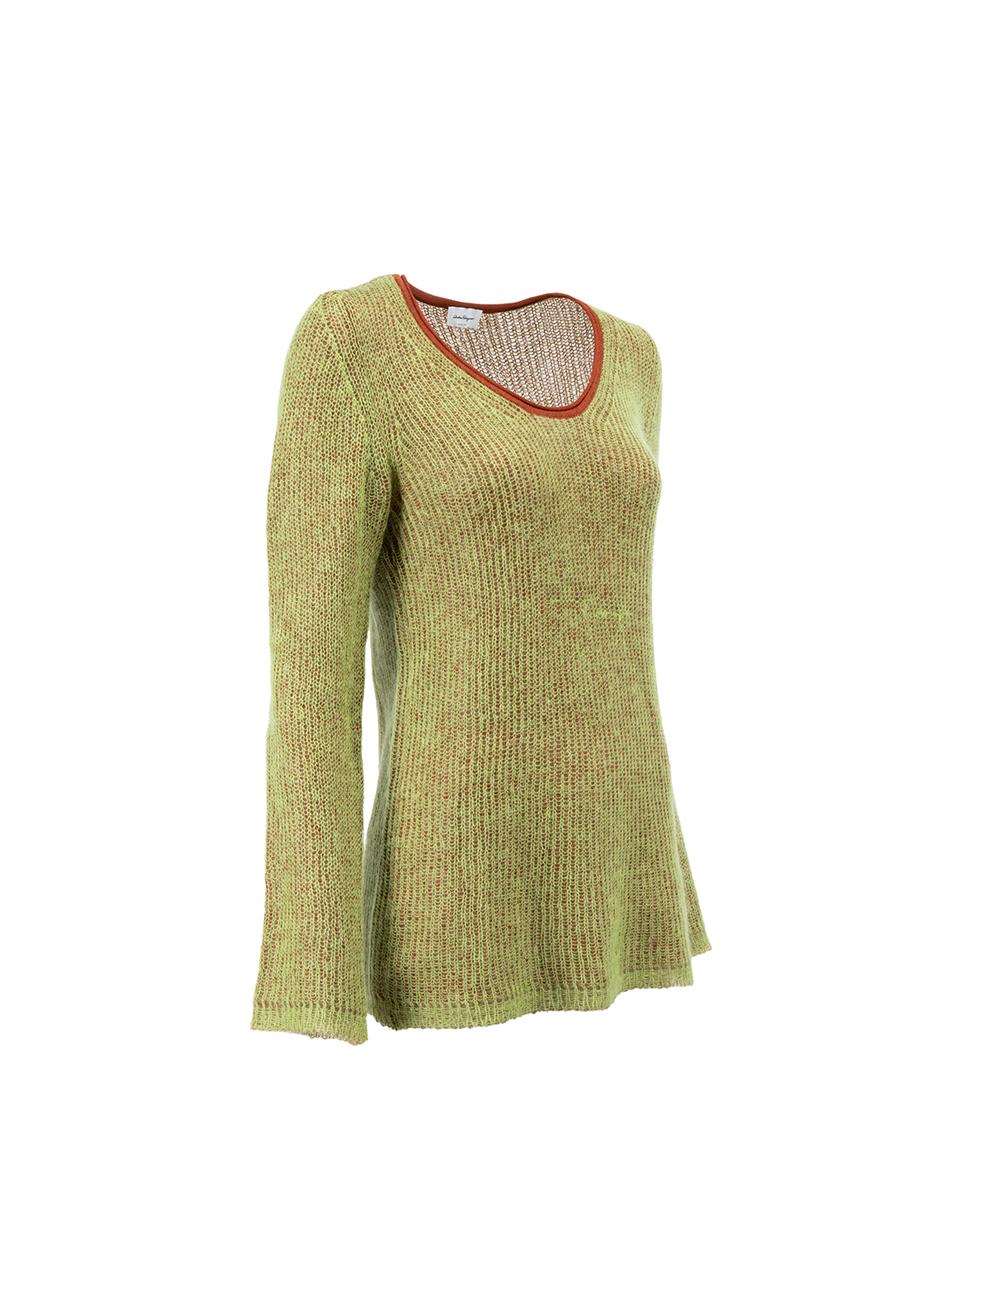 CONDITION is Good. Minor wear to jumper is evident. Light wear to the knit with holes to the top layer on this used Salvatore Ferragamo designer resale item.



Details


Green

Mohair wool

Knitted jumper

Long sleeves

Round